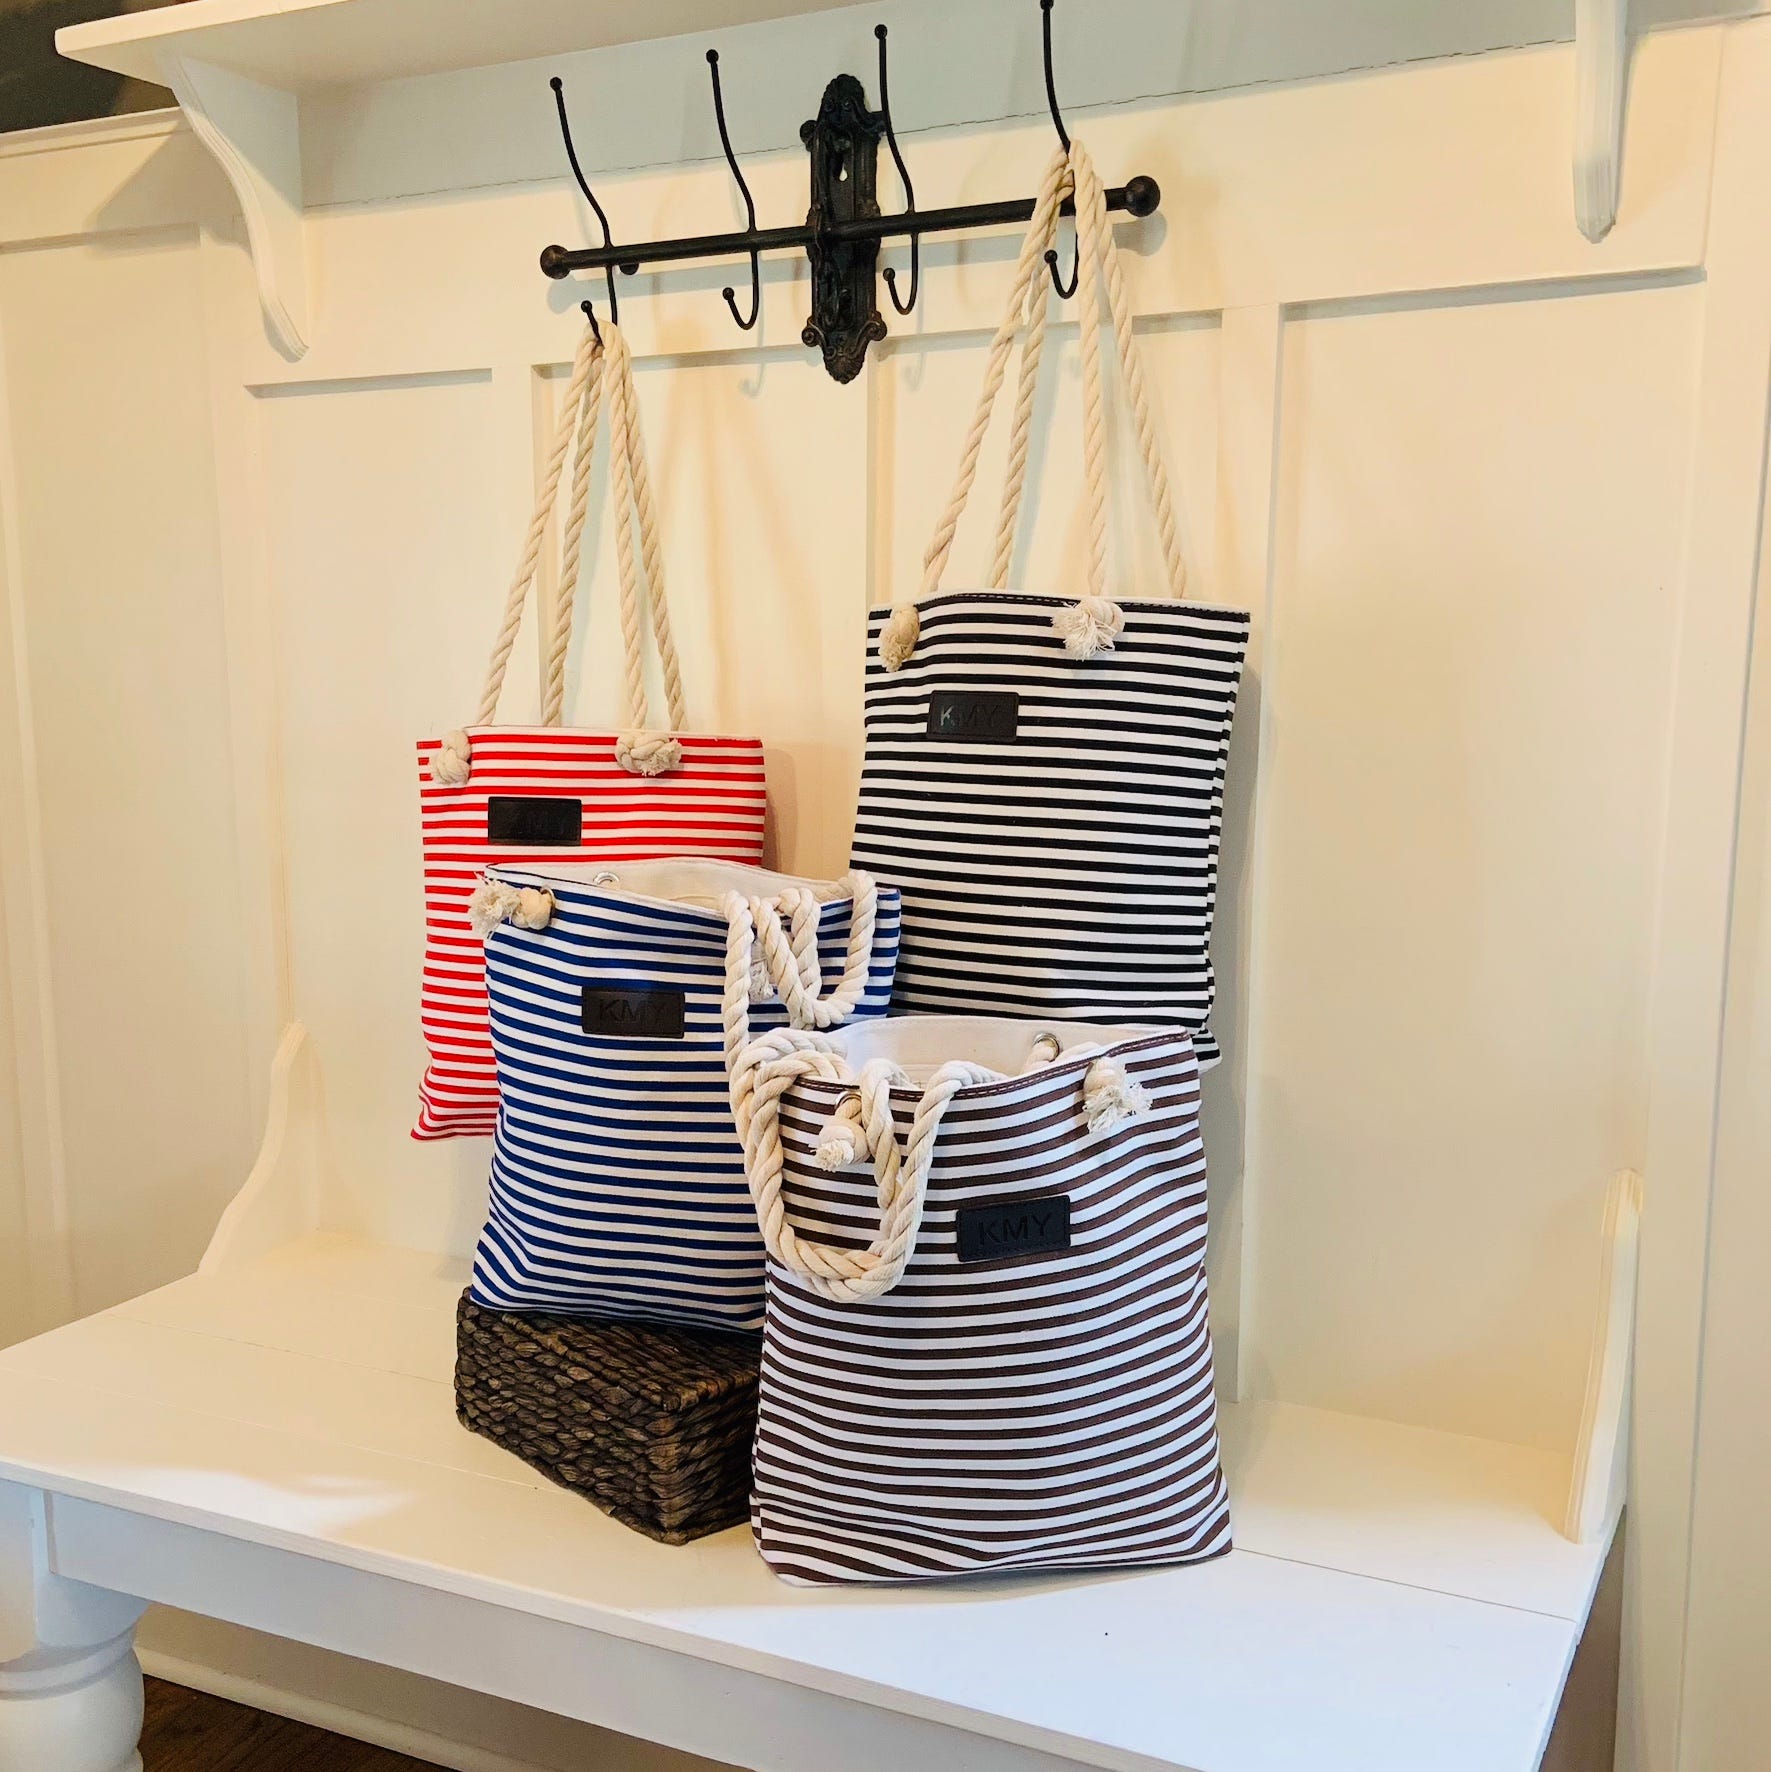 Striped tote bags with rope handles hanging on hooks against a white background.